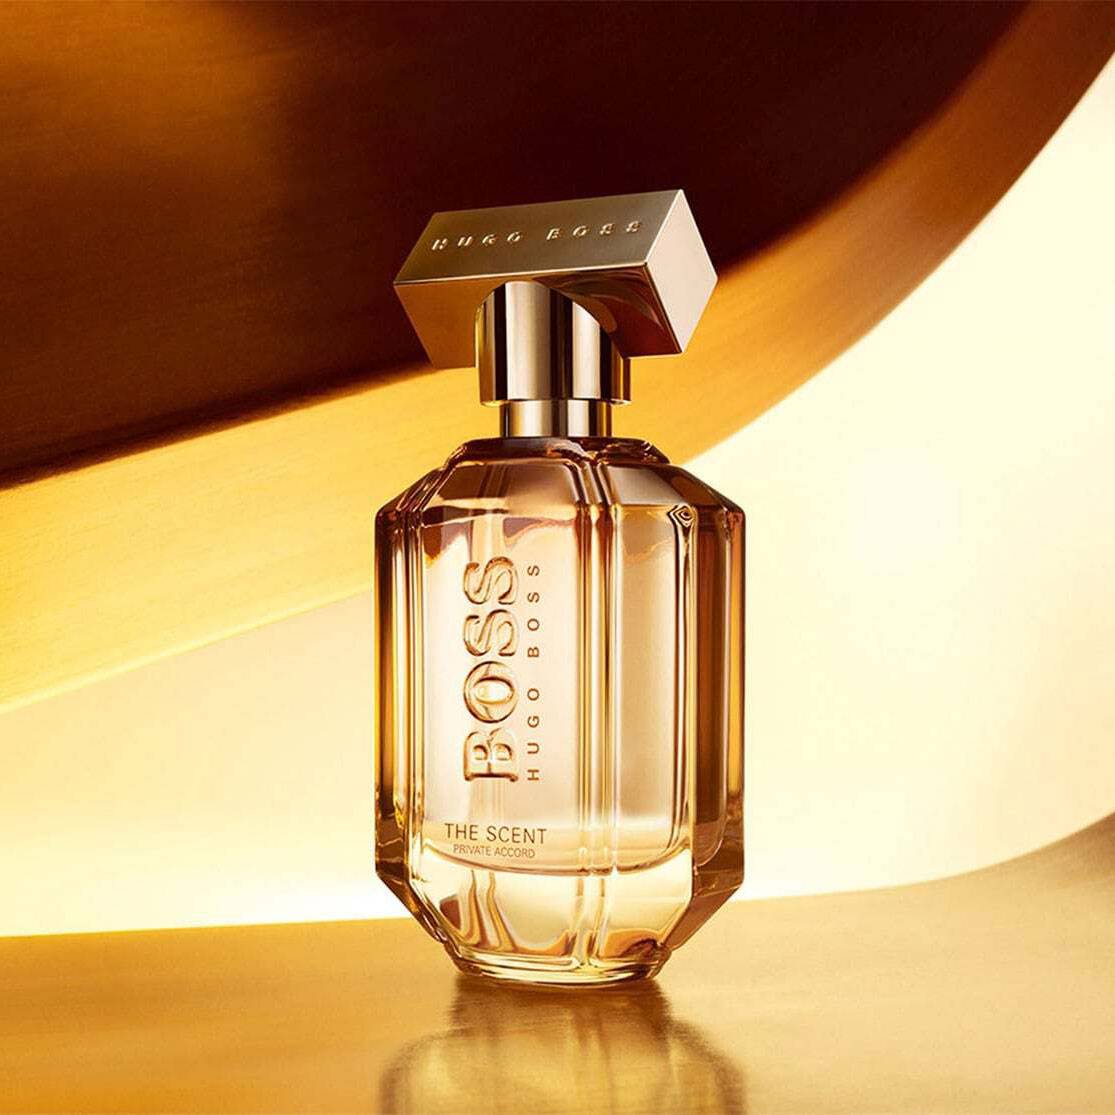 Хьюго босс сент. Hugo Boss the Scent private Accord for her EDP. Hugo Boss the Scent privat Accord. Hugo Boss the Scent private Accord for him 100 ml. Hugo Boss the Scent private Accord женские.